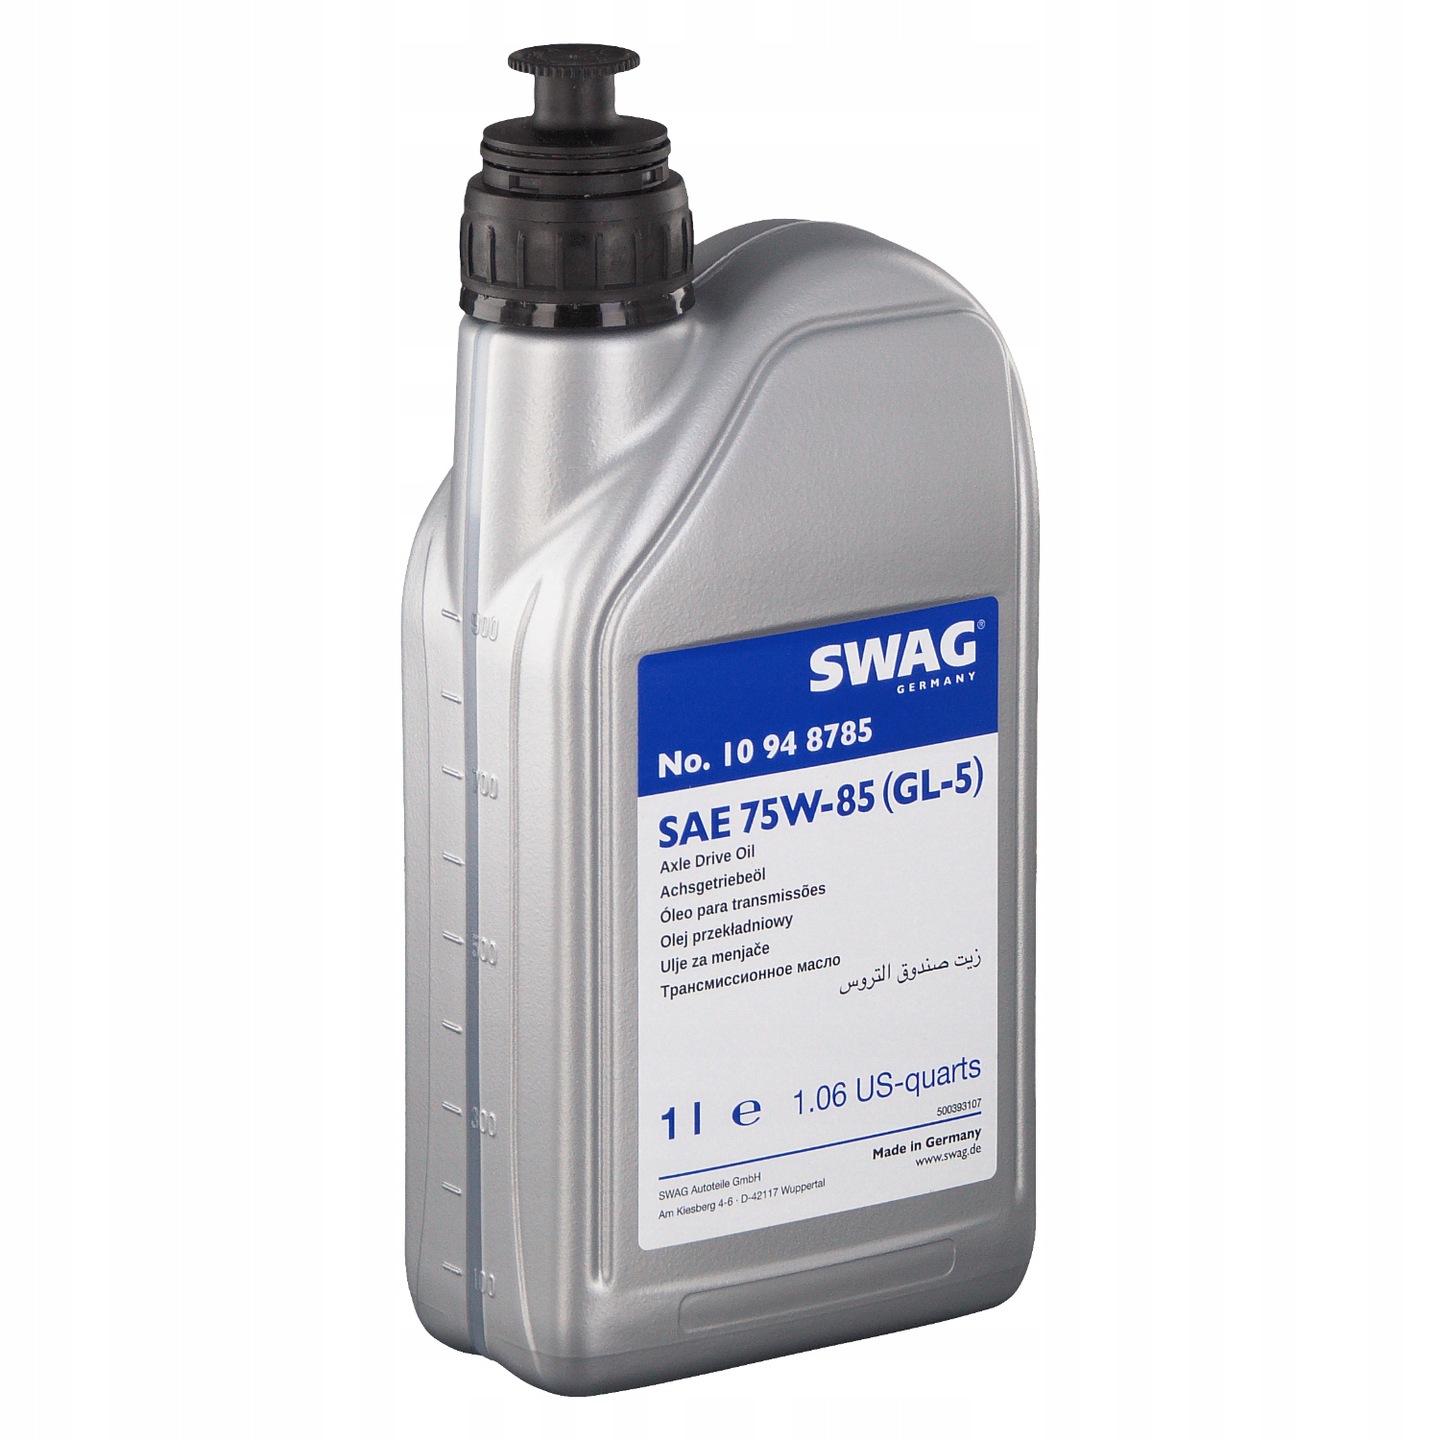 4044688590985 | Automatic Transmission Oil SWAG 10 94 8785